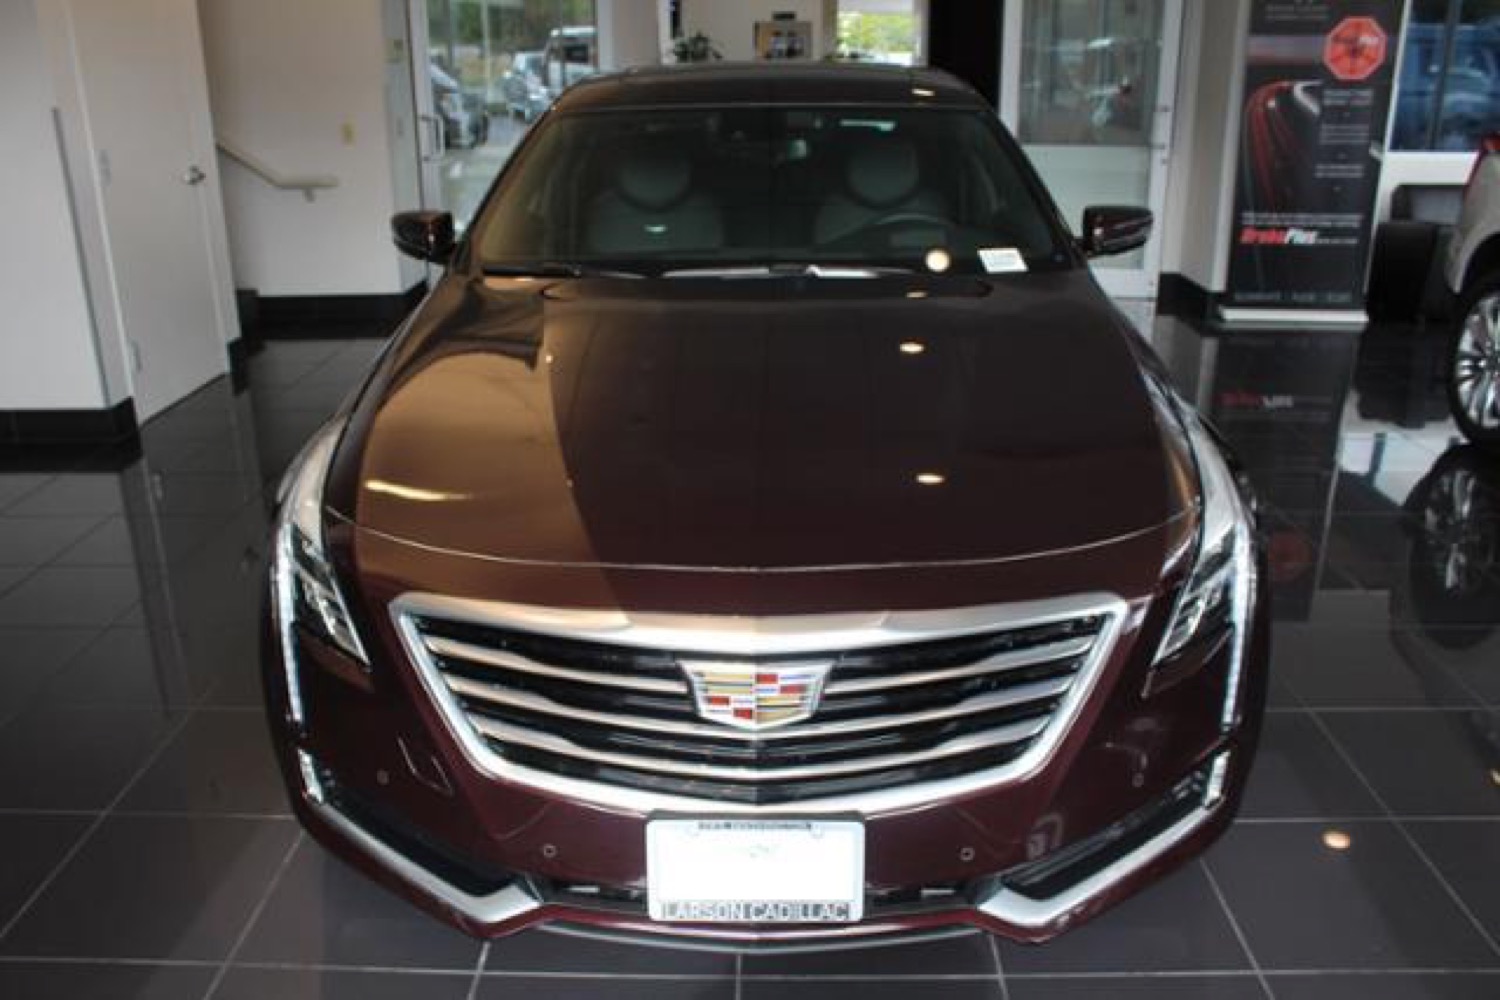 This Washington Dealer Has Five New 2018 Cadillac CT6 PHEVs For Sale